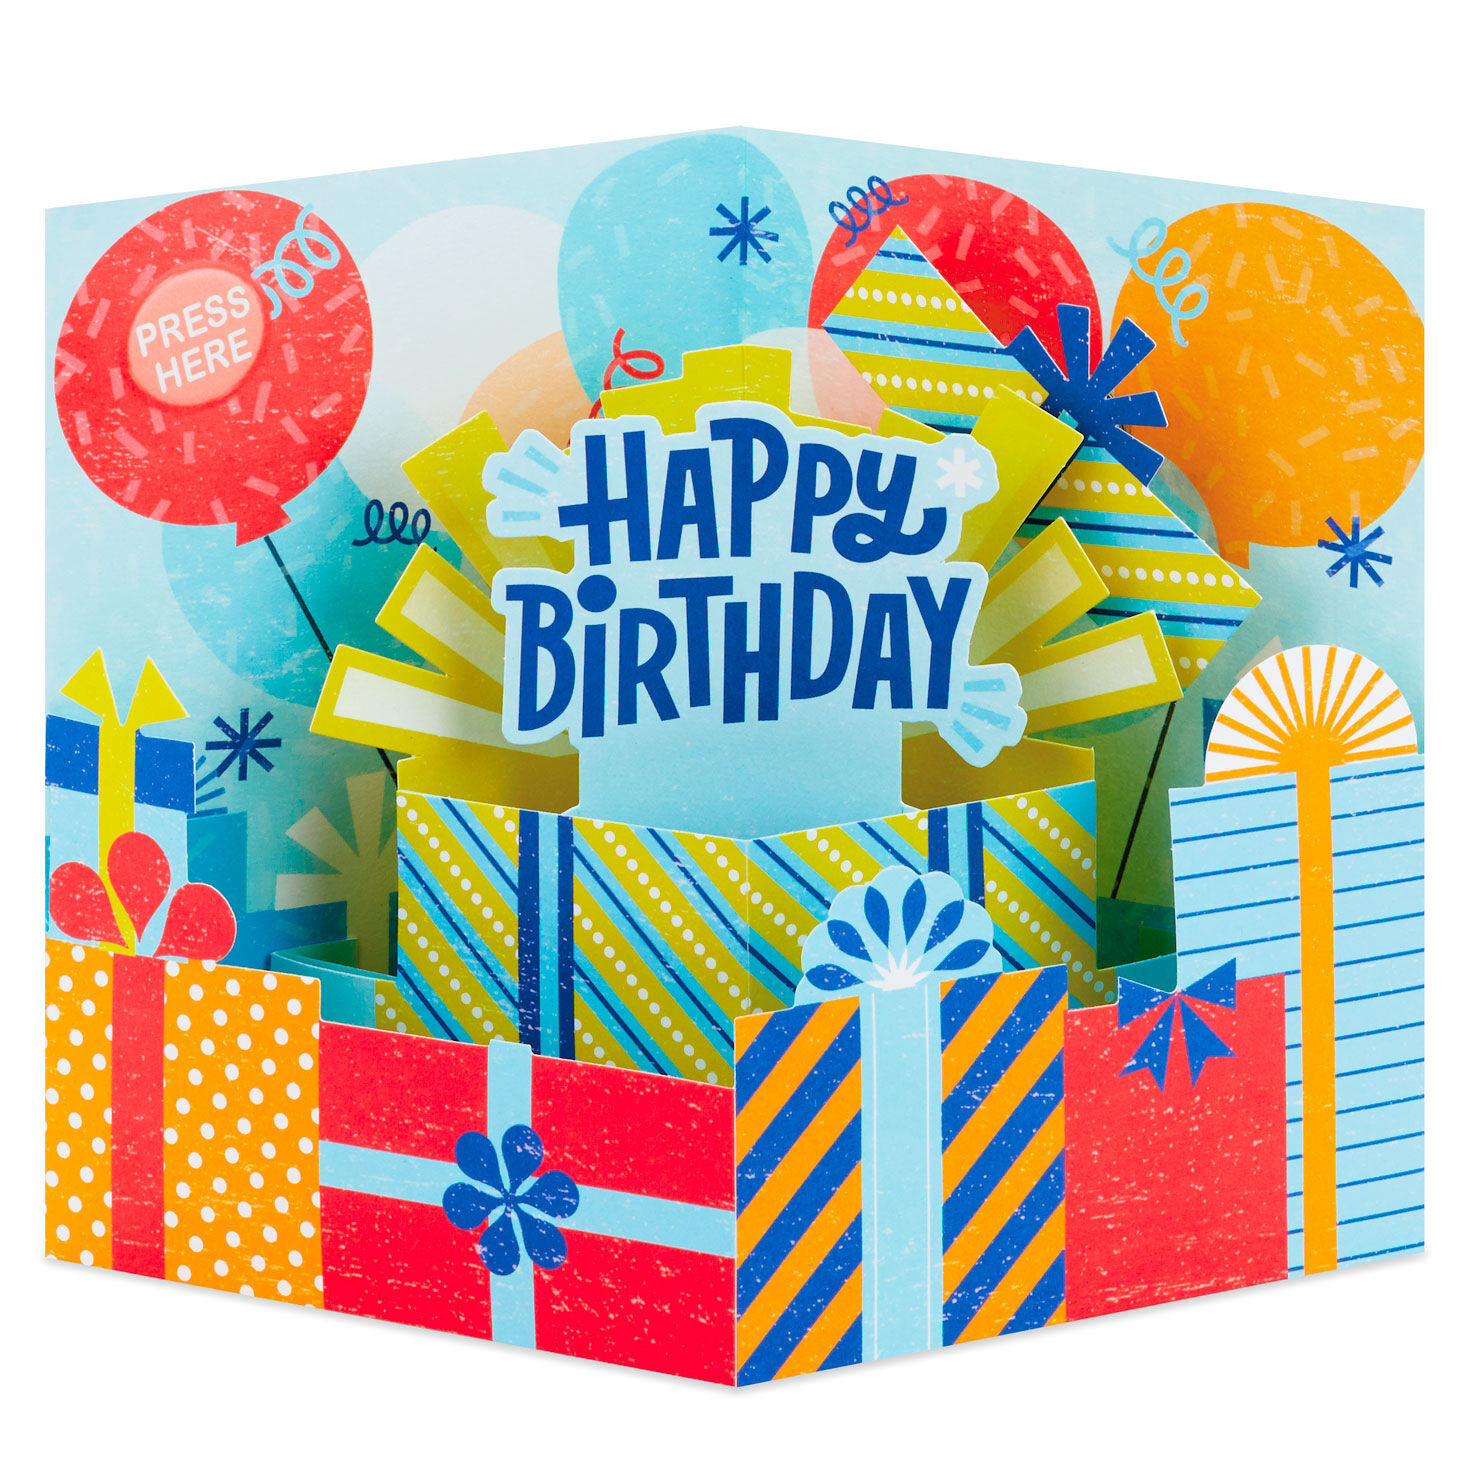 Details about   GrayStag Premium Surprise 3D Pop Up Happy Birthday Card for Her Popup Birthday 